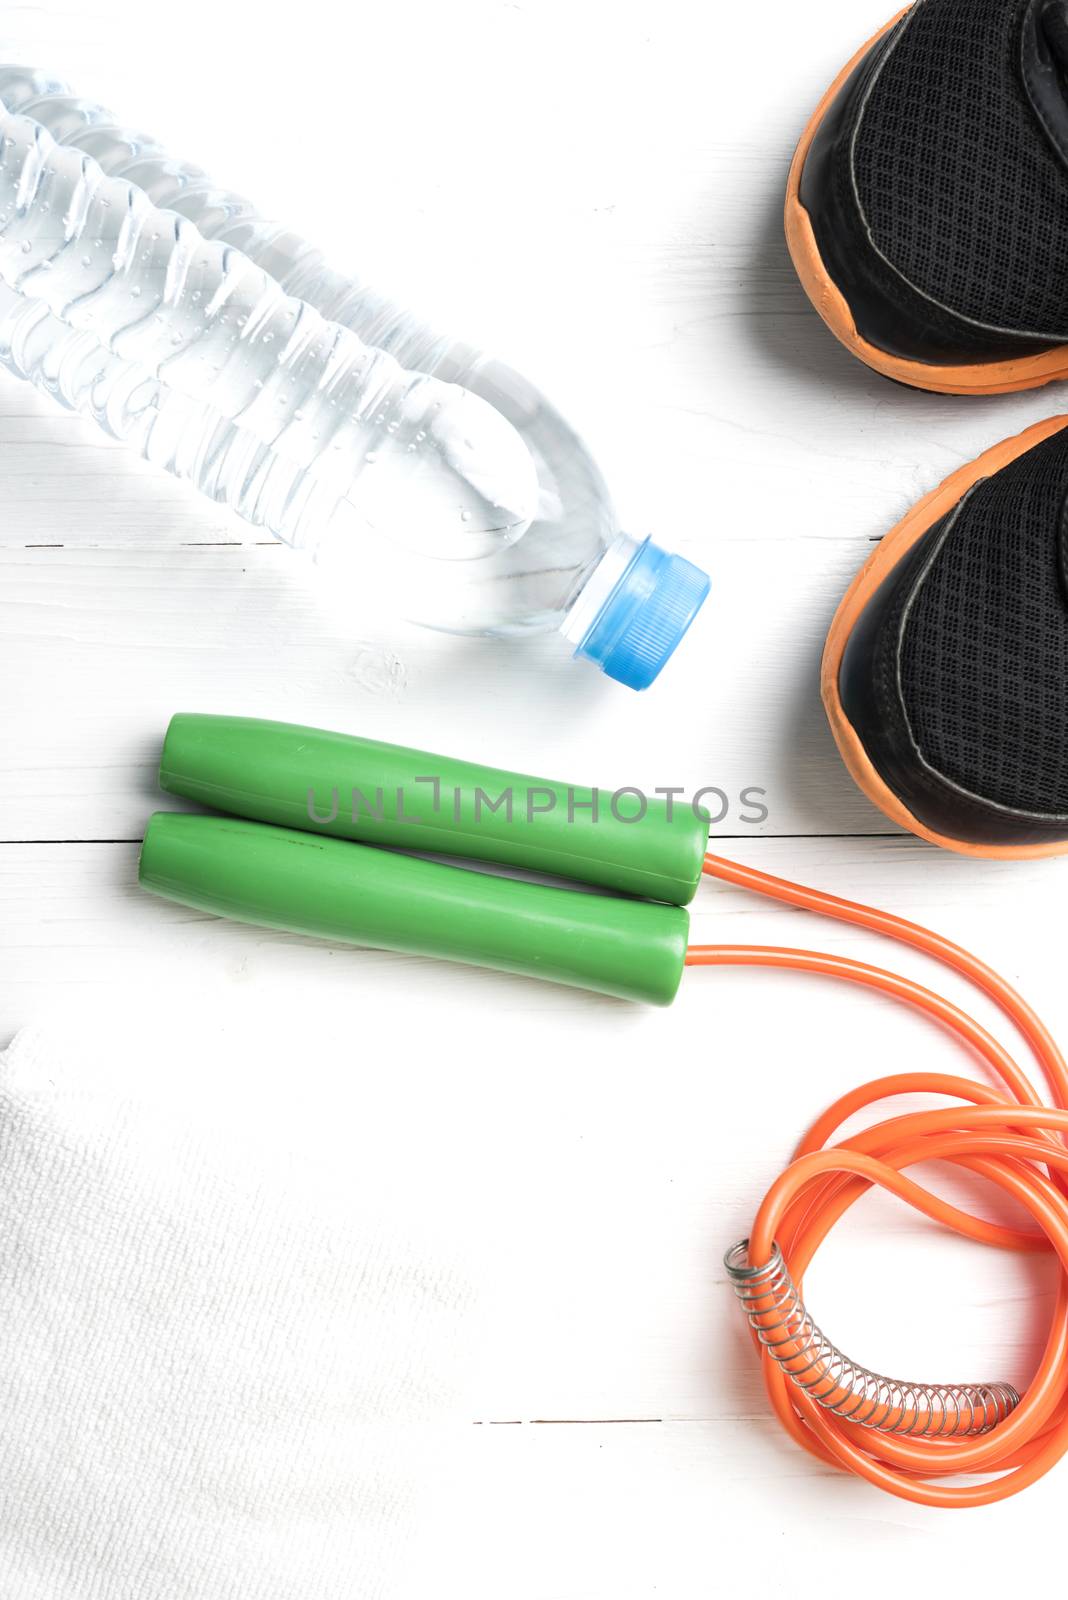 fitness equipment:running shoes,water bottle,towel,rope